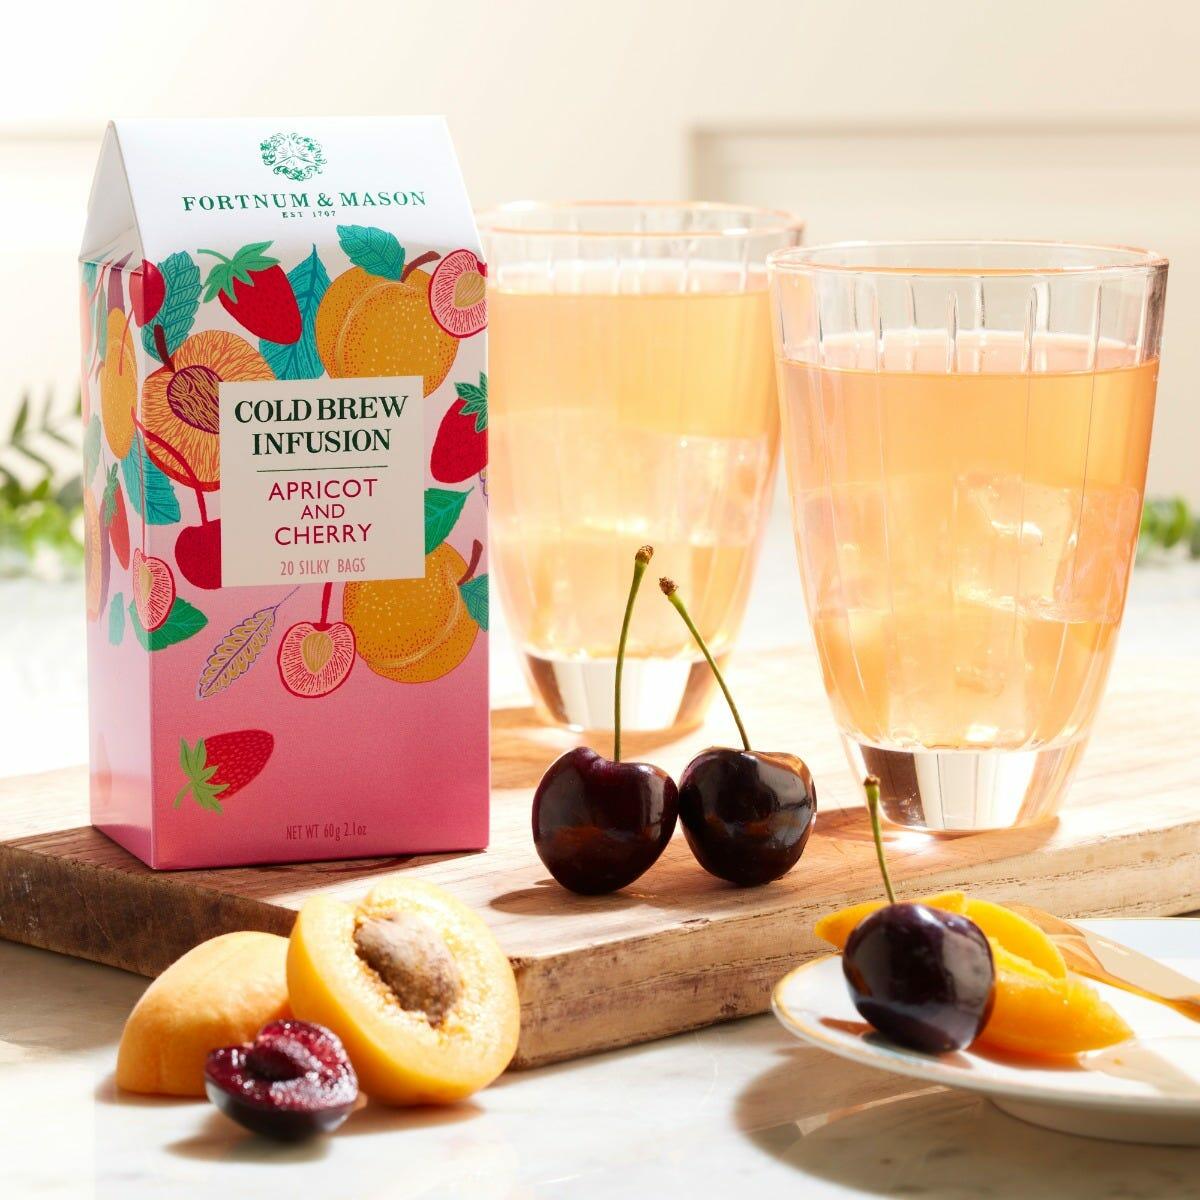 Apricot & Cherry Cold Brew Infusion, 20 Silky Tea Bags, 60g, Fortnum & Mason